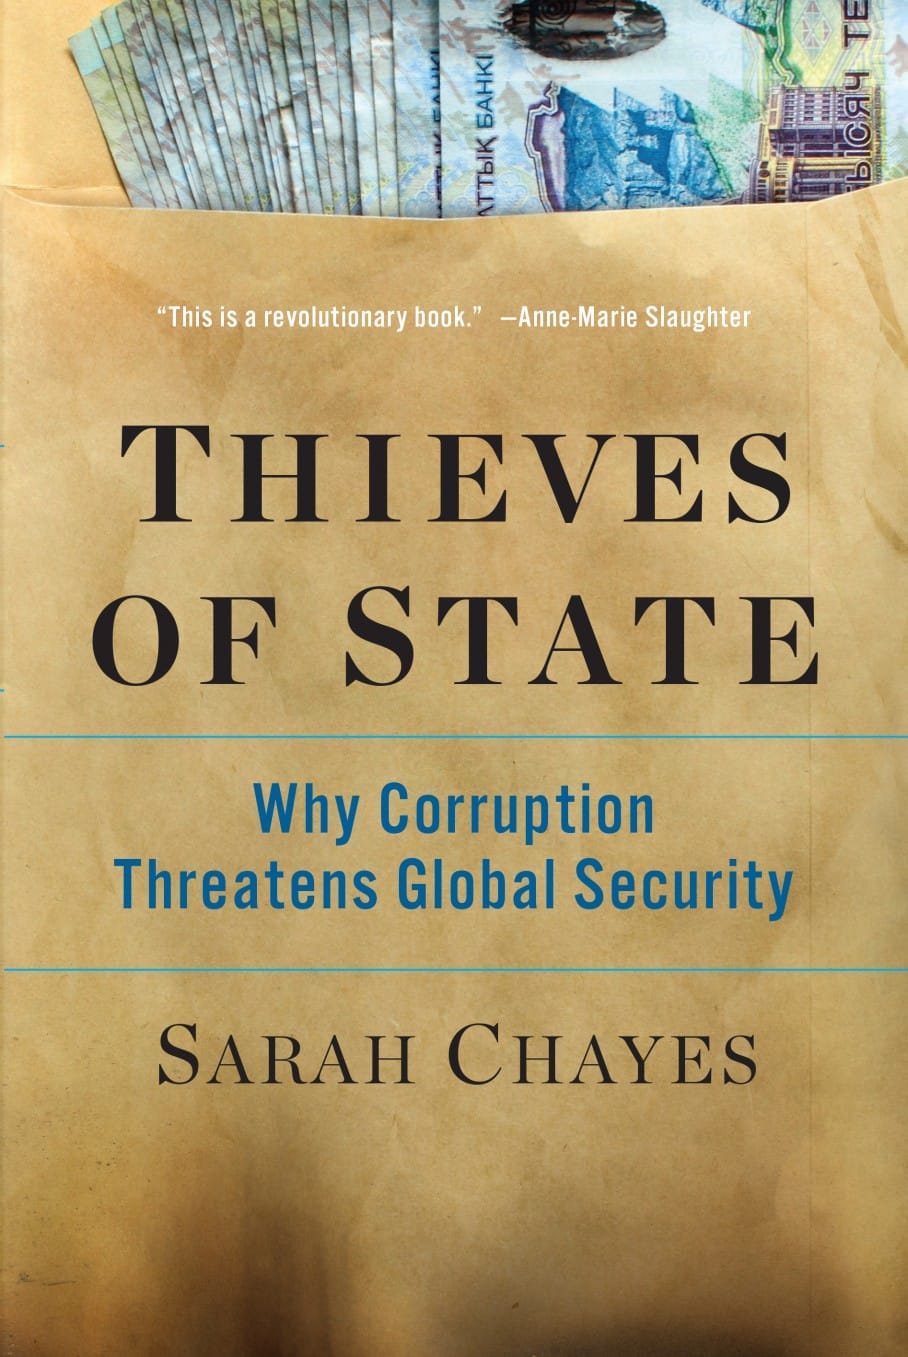 http://www.thievesofstate.com/About-Thieves-of-State---Sarah-Chayes.html